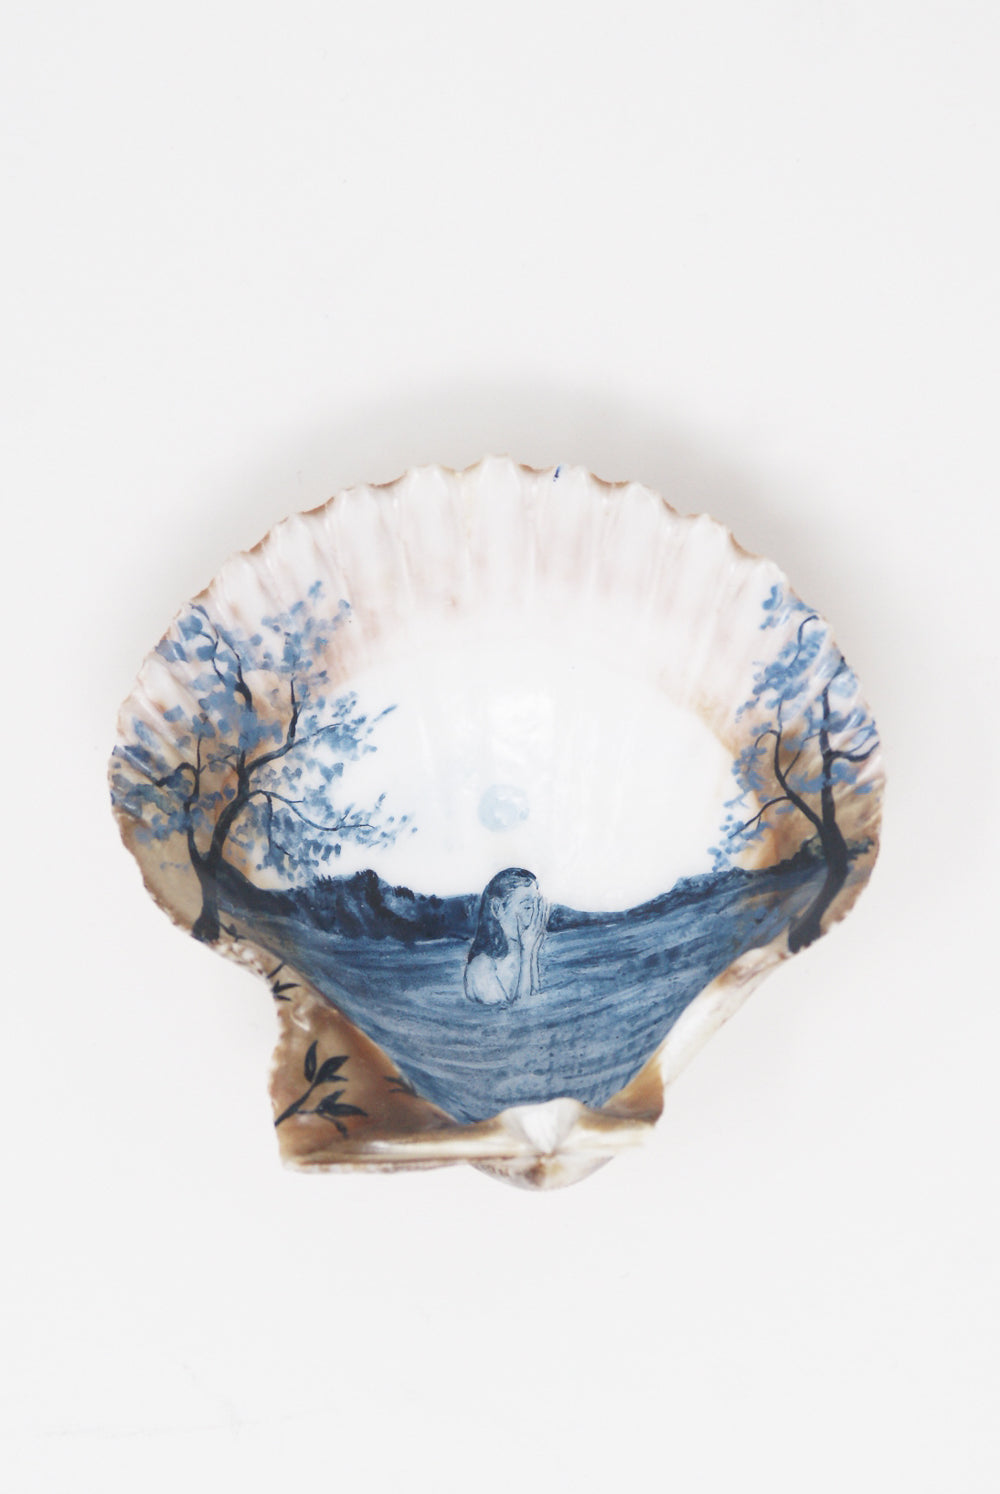 Alyssa Goodman - Hand Painted Shell in Sunset top view